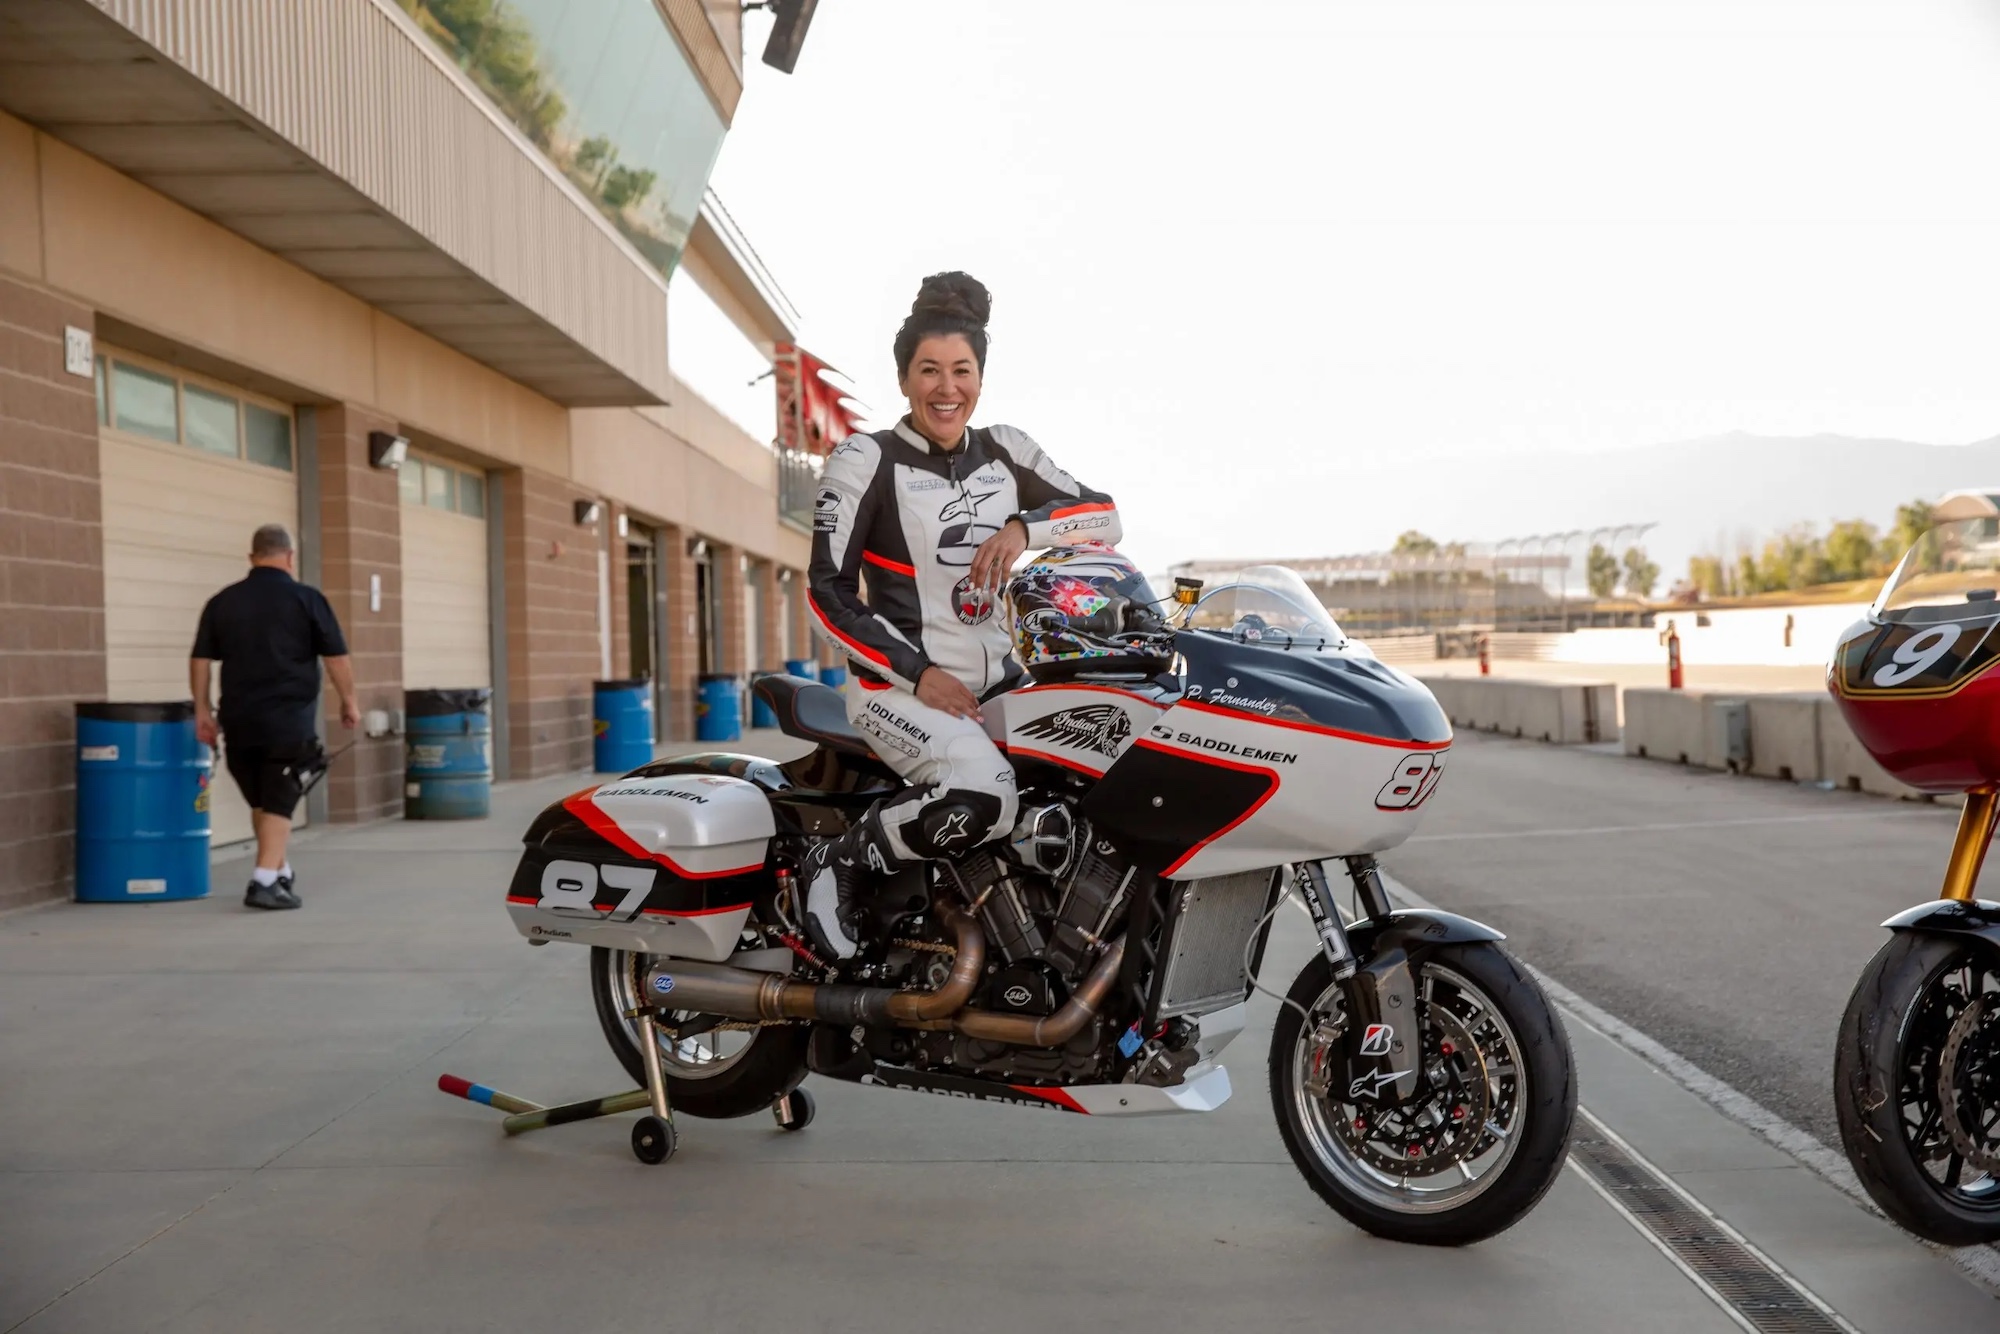 Patricia Fernandez (now Fernandez-West), American motorcycle racer and general circuit talent. Media courtesy of Patricia's team.